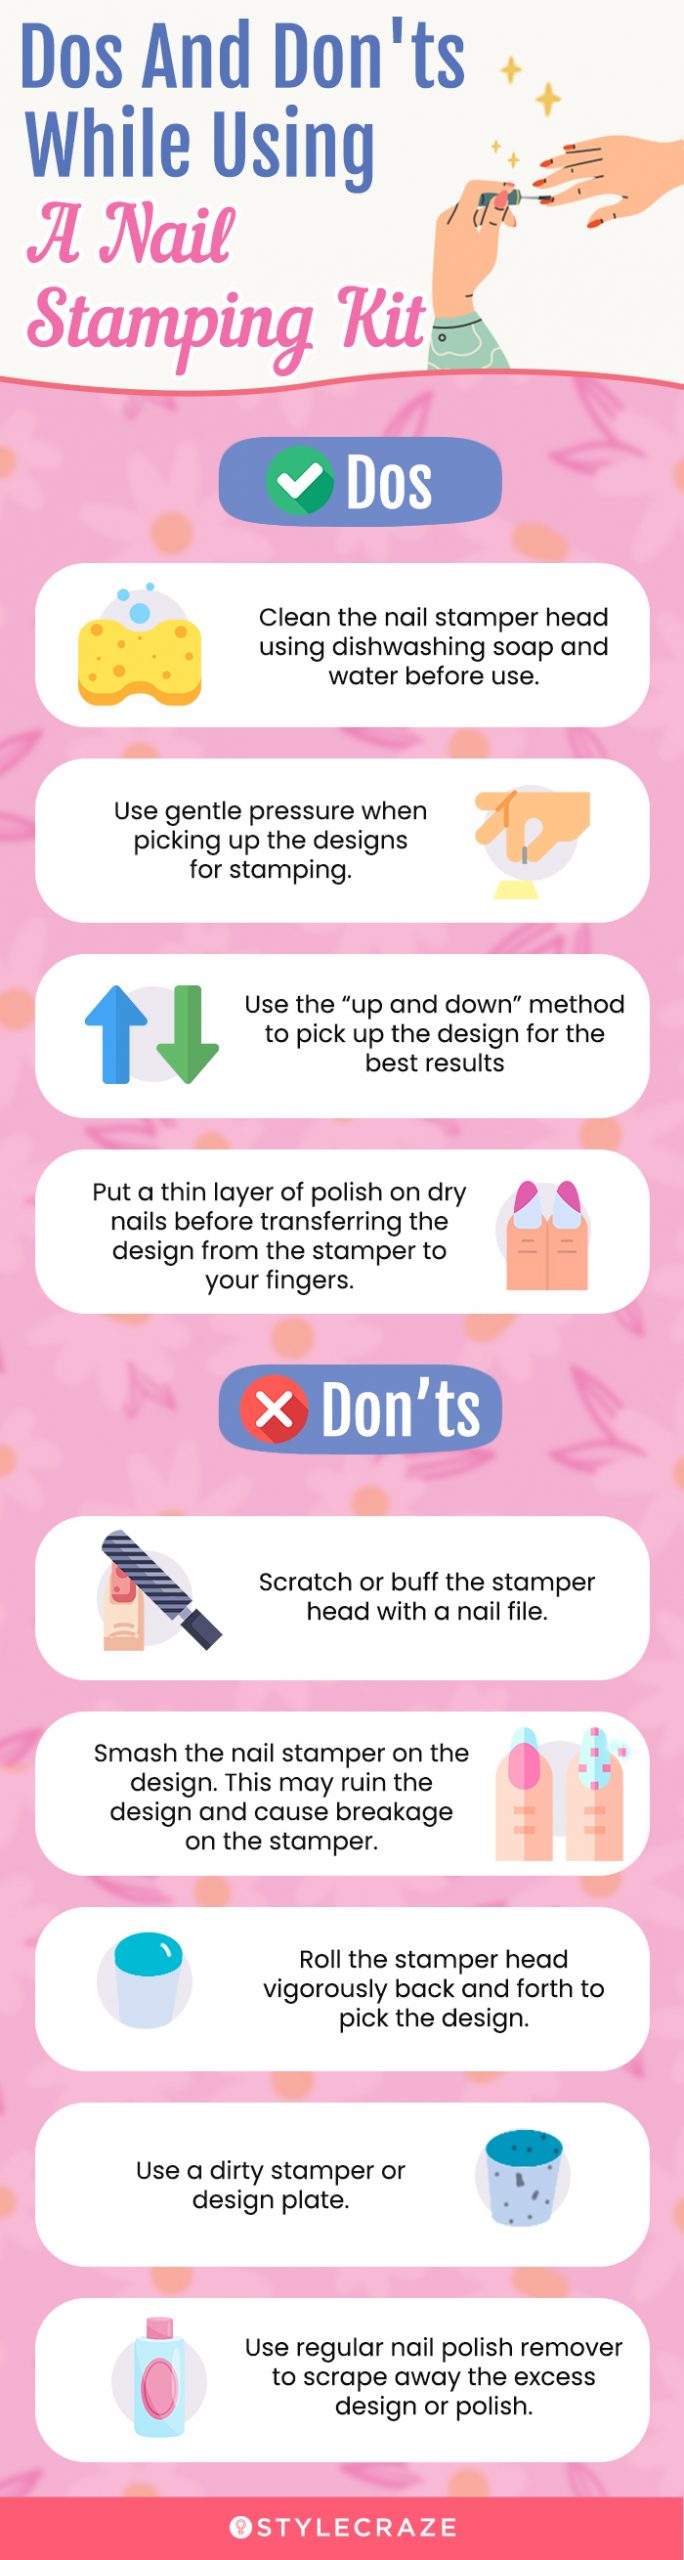 Dos And Don'ts While Using A Nail Stamping Kit (infographic)